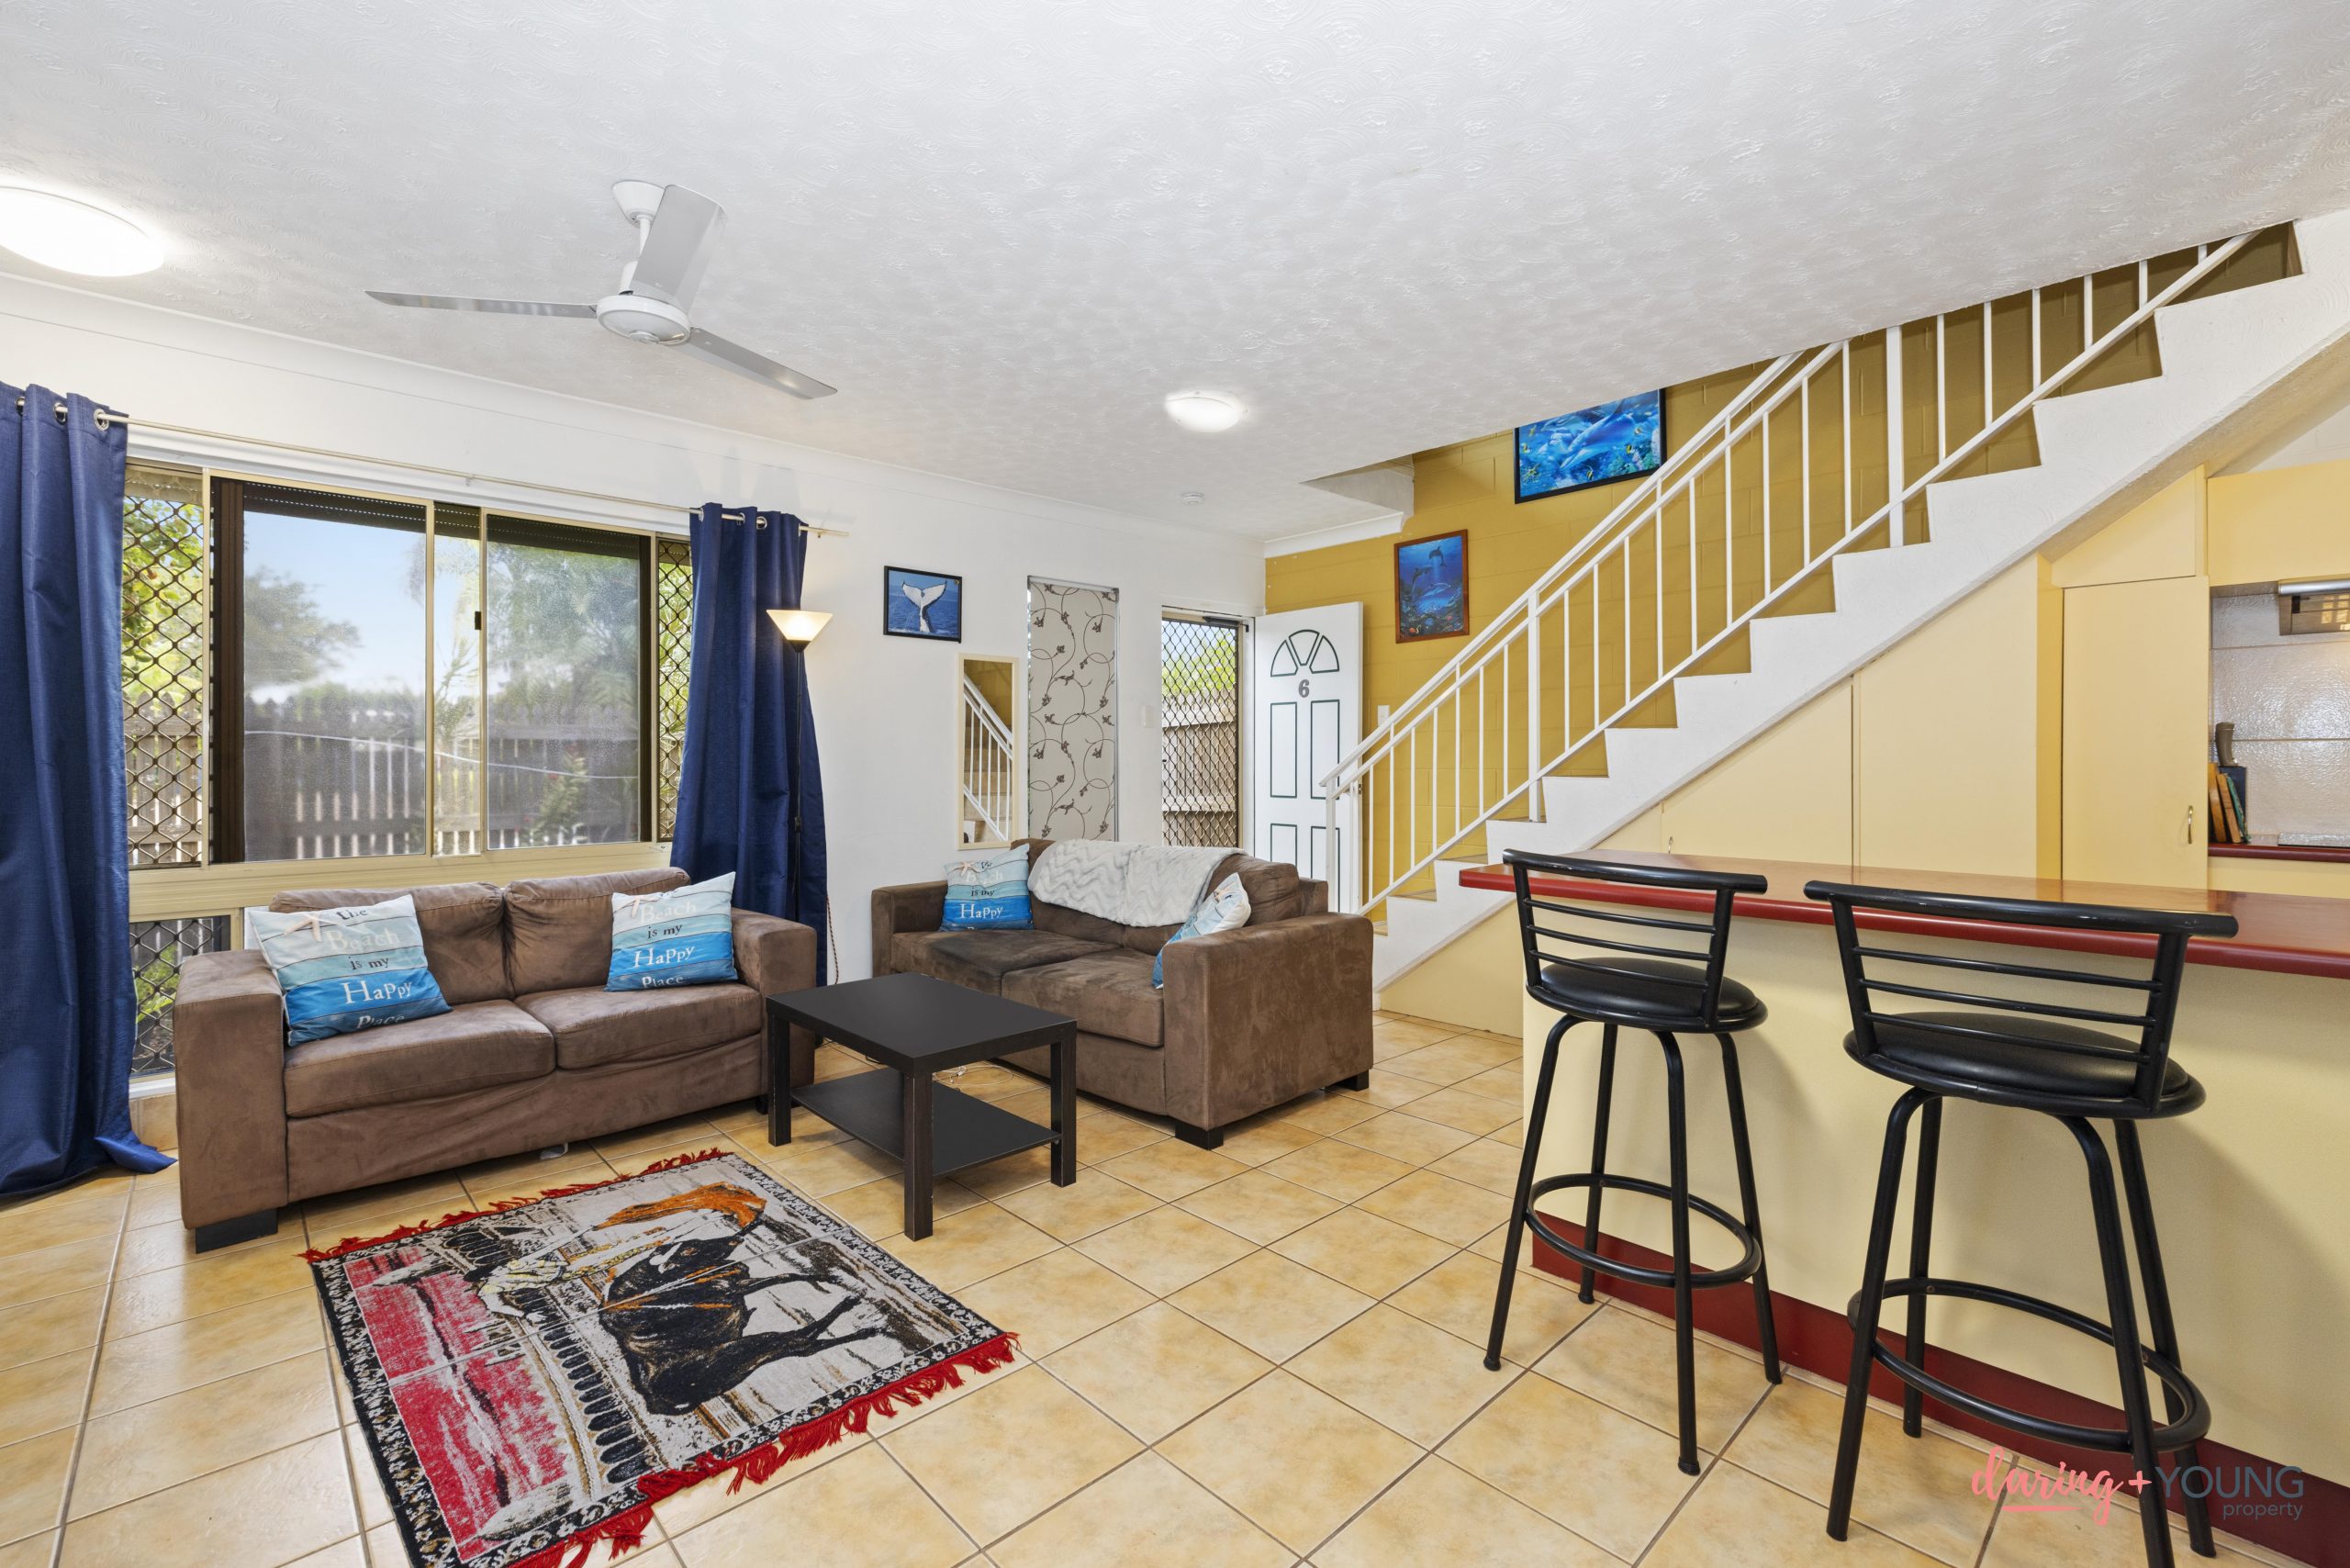 Townhouse with Solar in the heart of Mundingburra …. Great Investment Opportunity!